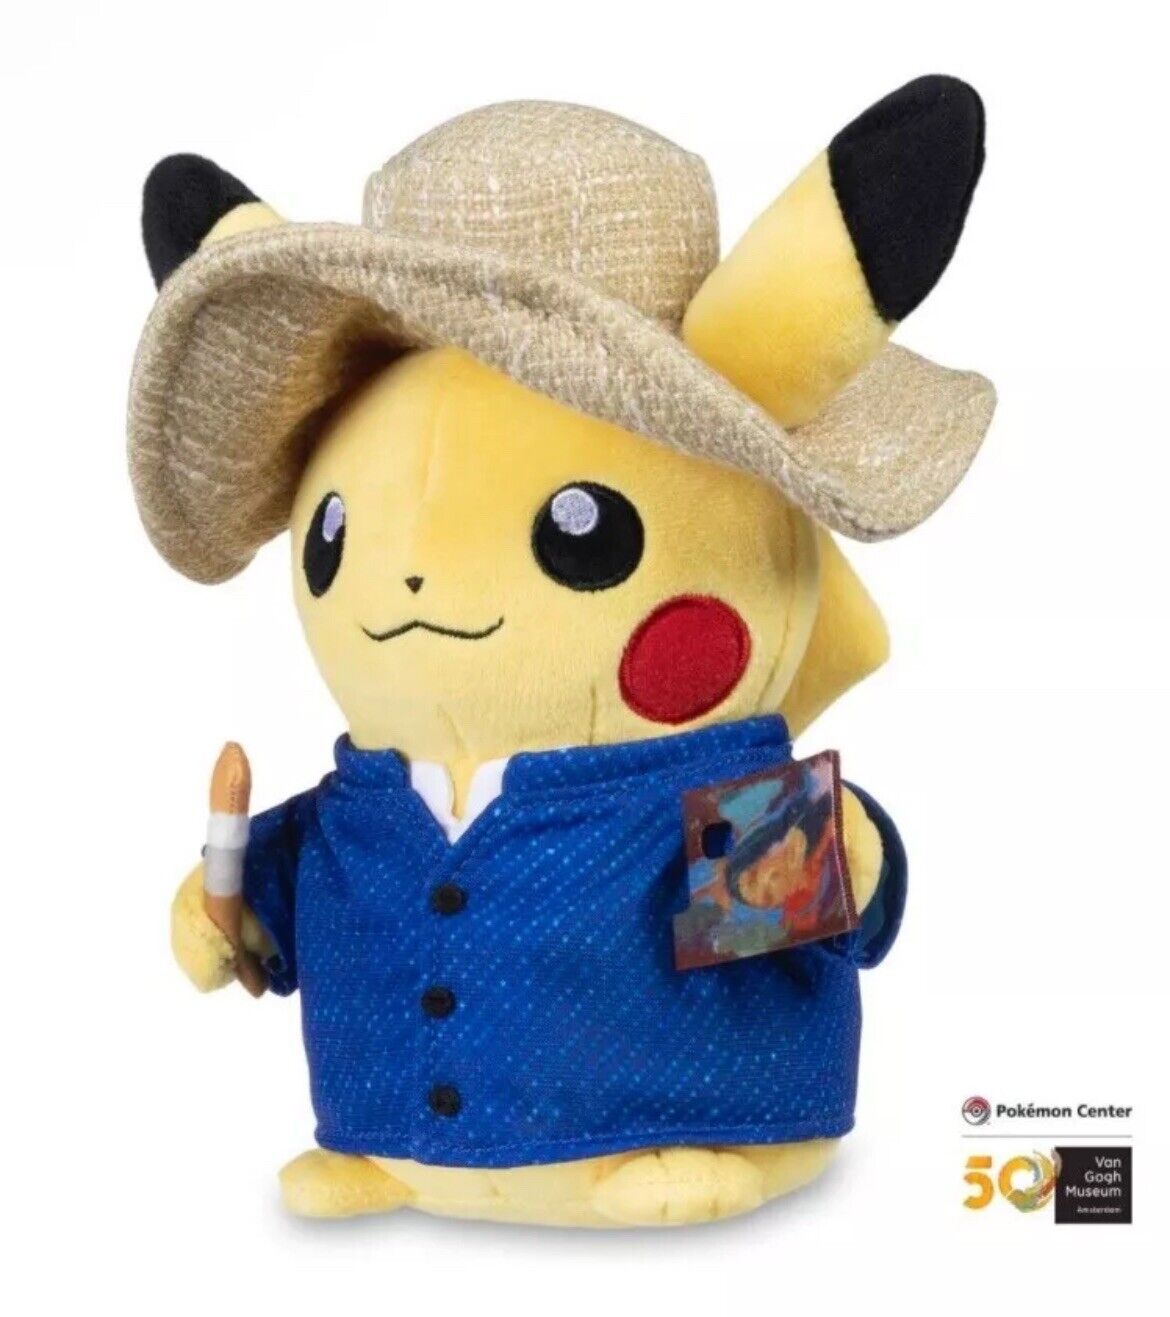 Pokémon Center × Van Gogh Museum: Pikachu Plush 7 ¾ In. - Sealed And In Hand